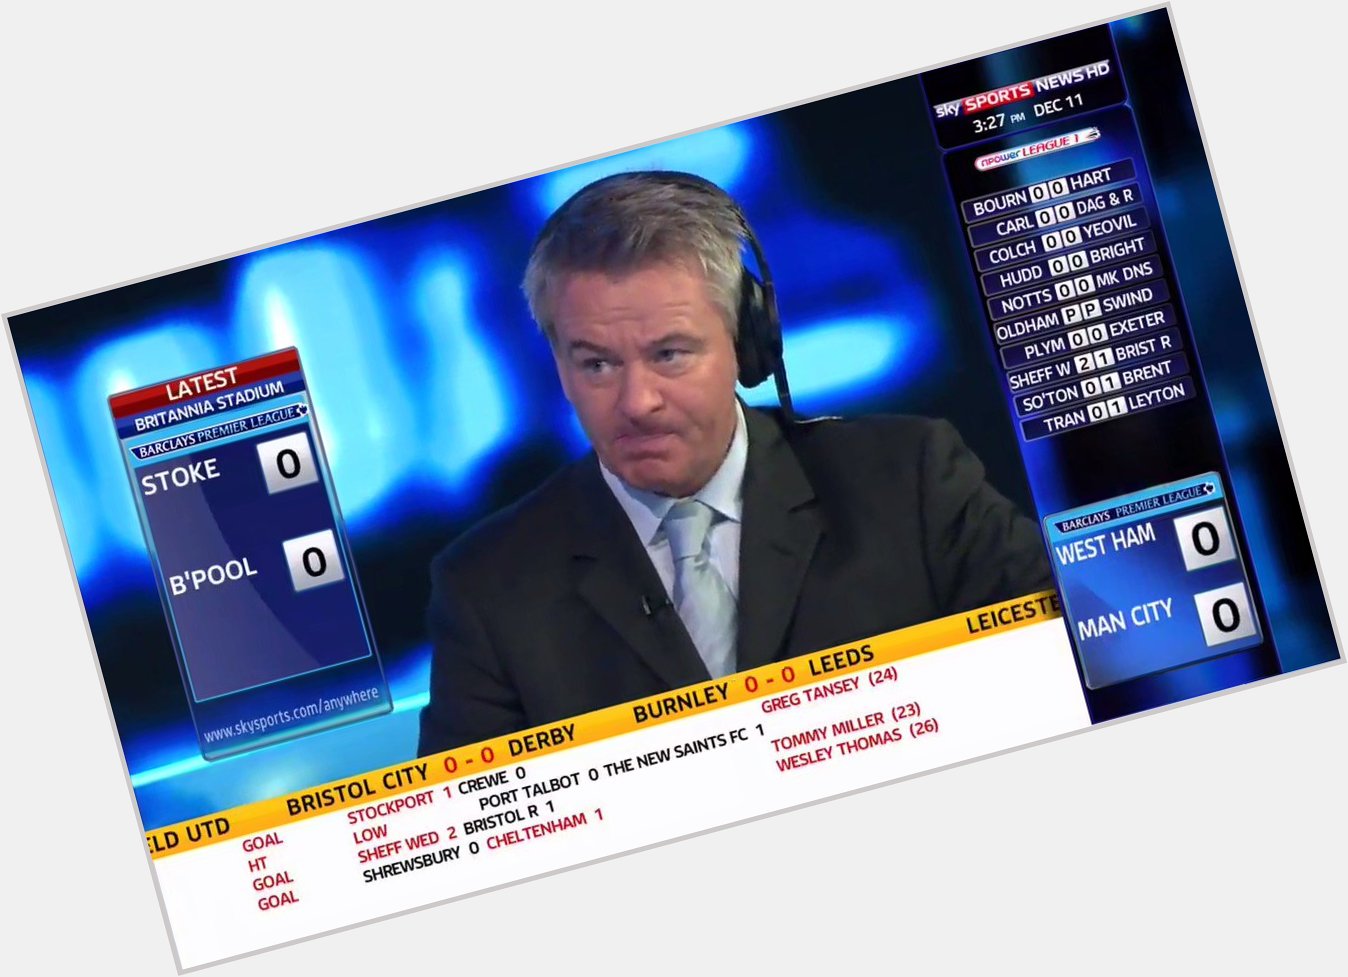 Happy 5  9  th Birthday to Charlie Nicholas This belter never gets old   